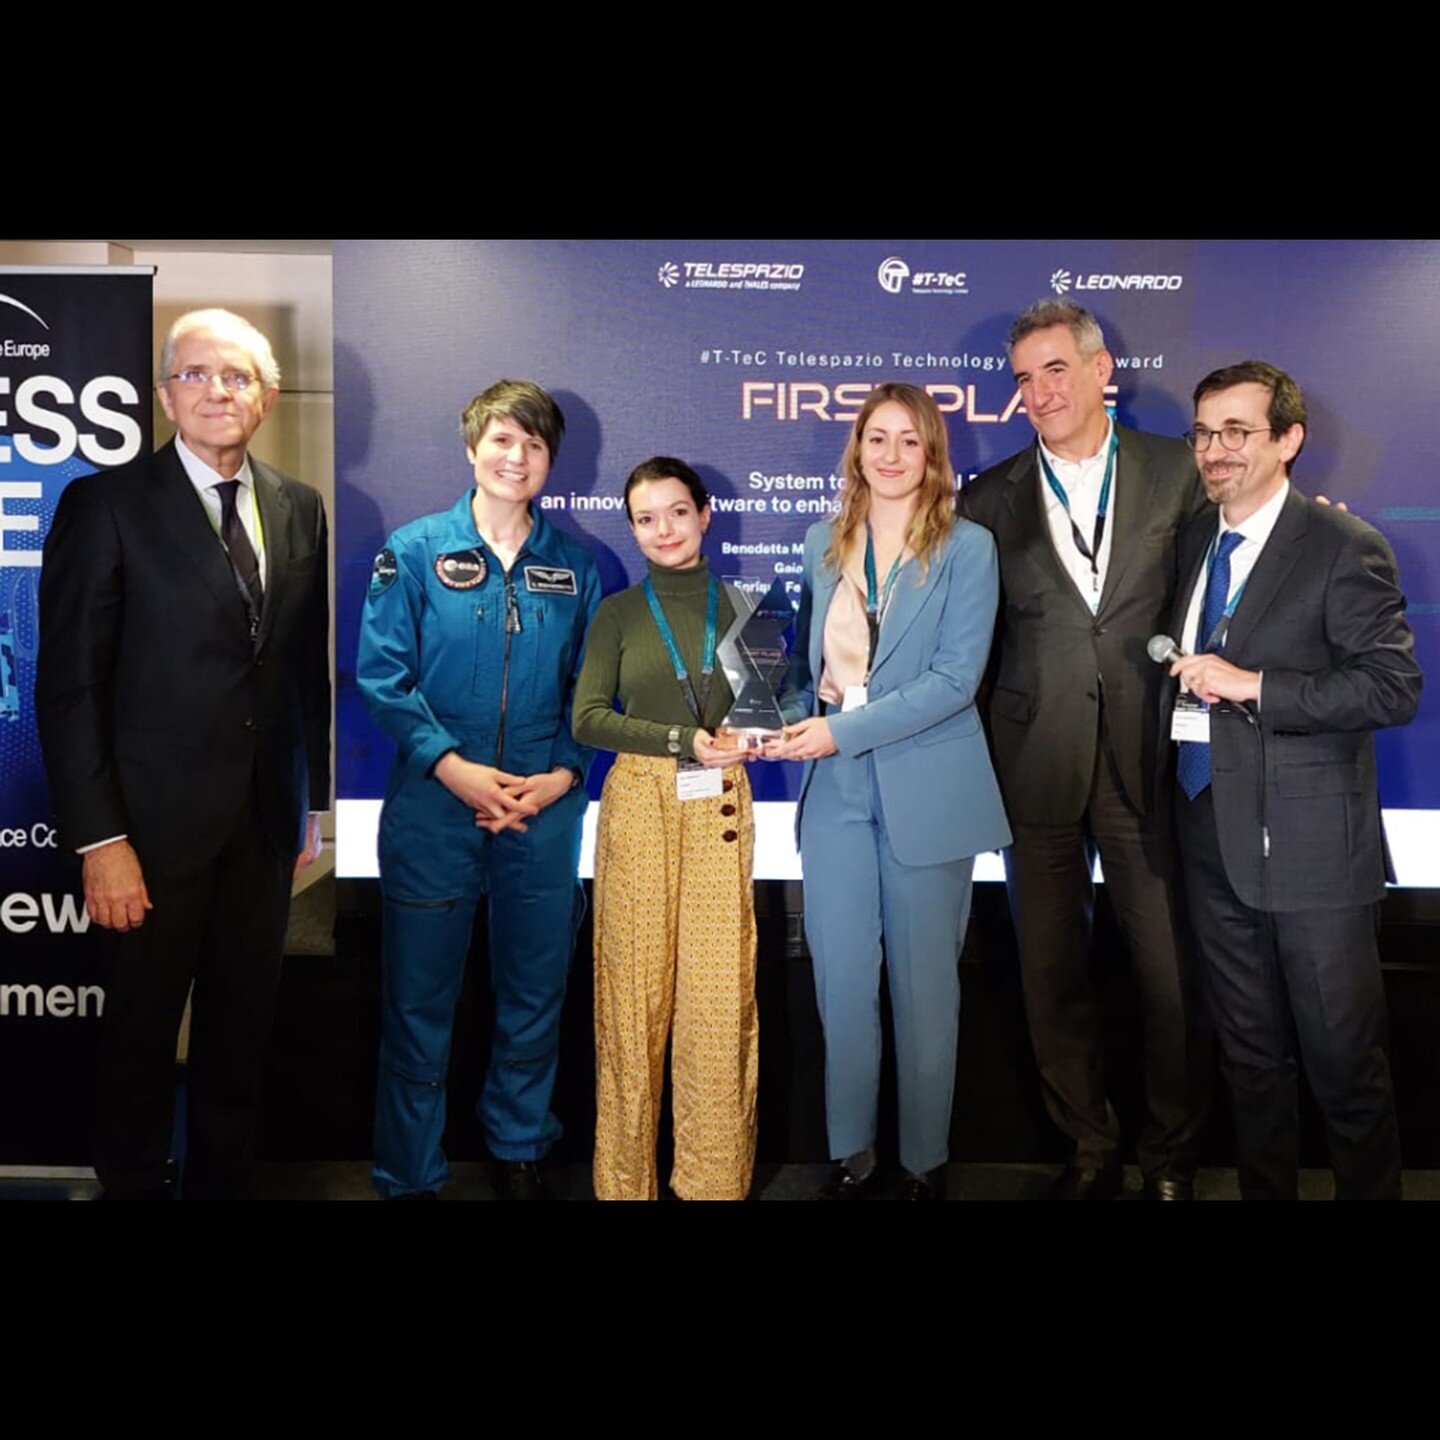 Back to the TTec 2022 awards ceremony, promoted by @leonardo_company and @telespazio_company, which rewarded Ecosmic's team for the development of SAFE! 
Some pictures also from the Telespazio Roadshow held in Rome in February, during which @gaia_ohj